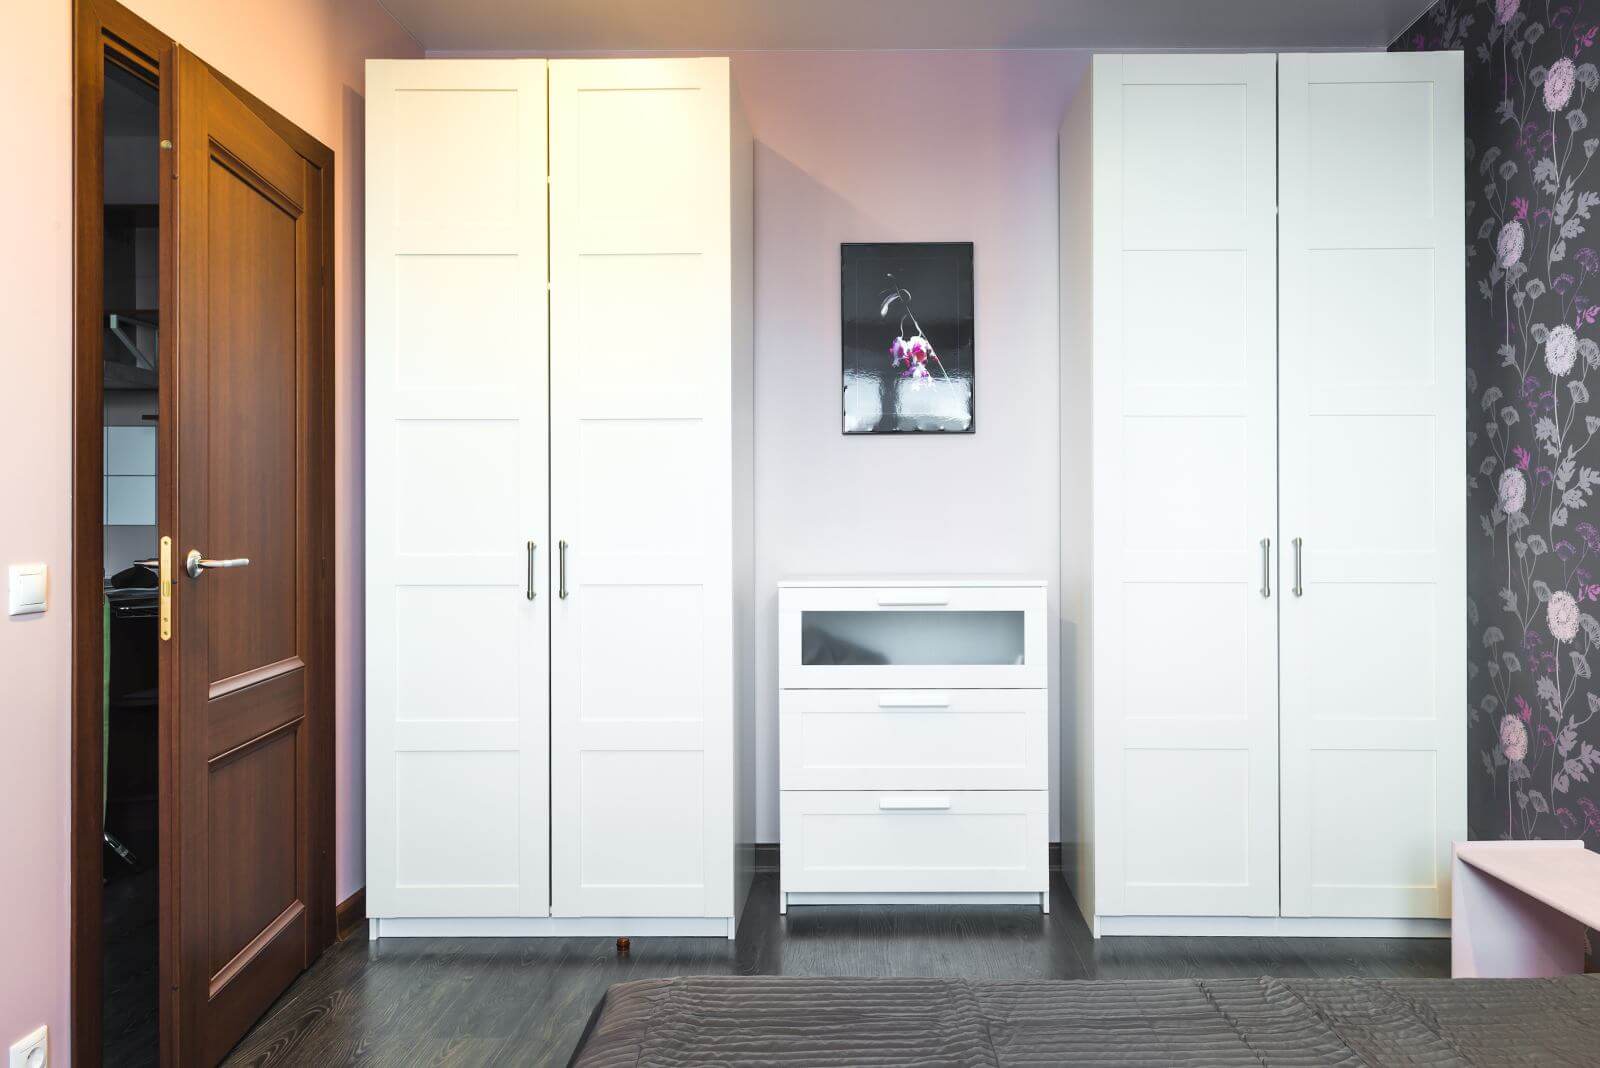 Interior bedrooms with wardrobes and a chest of drawers